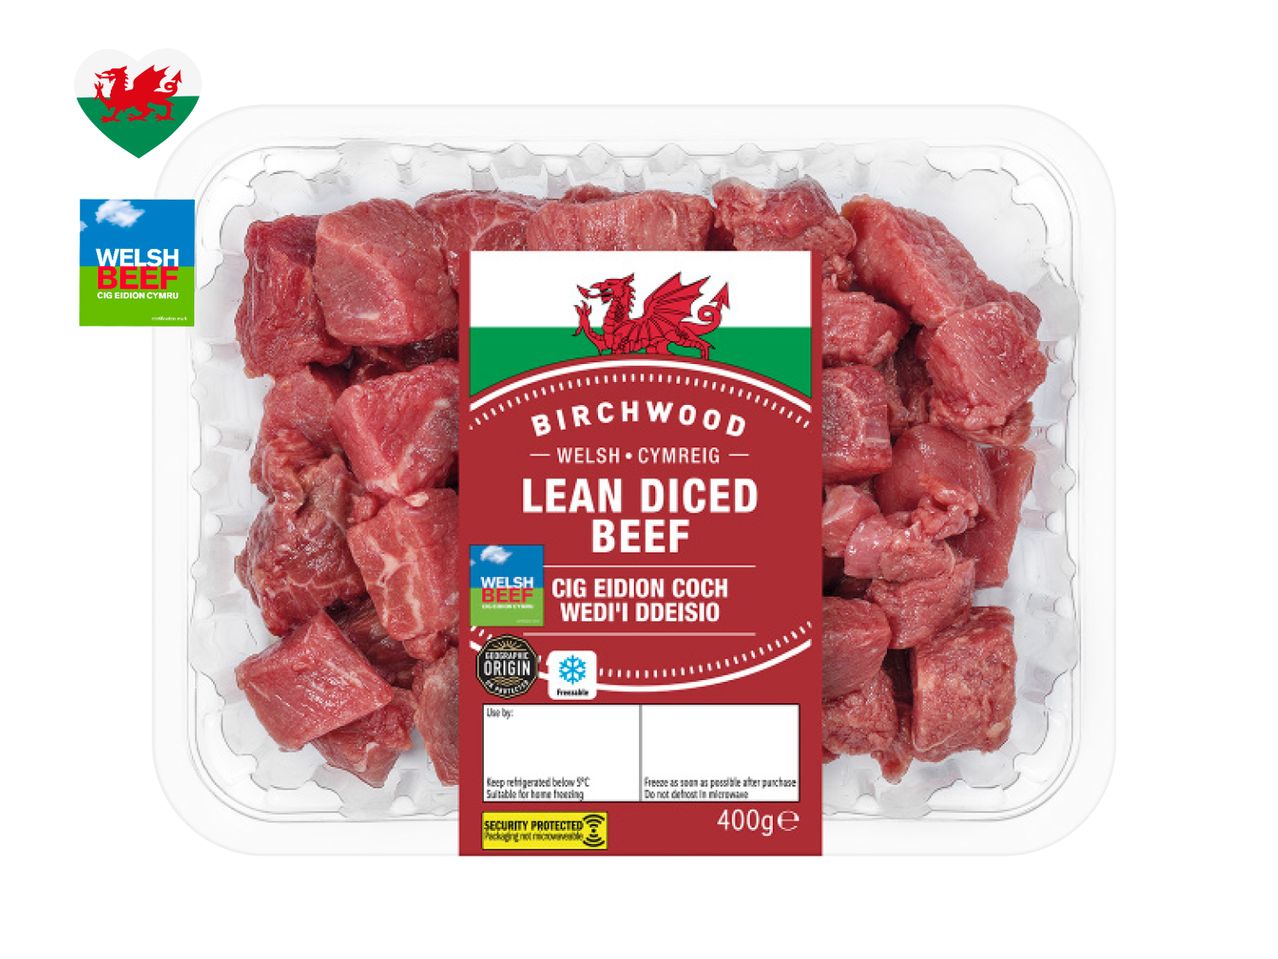 Go to full screen view: Birchwood Welsh Lean Diced Beef - Image 1